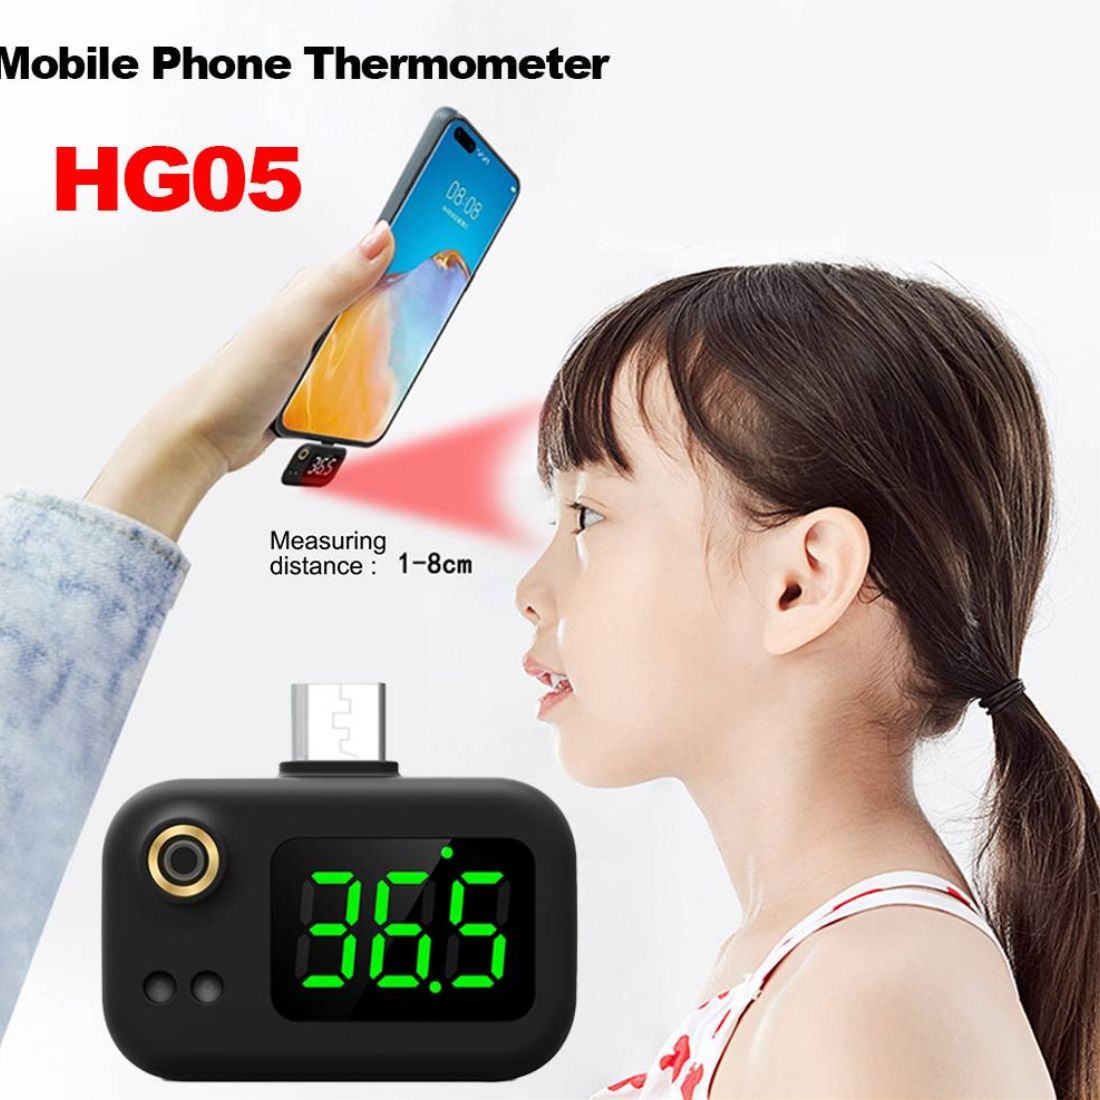 Smartphone-Connected Mini Infrared Thermometer, Versatile Temperature Measurement for Health and Environment